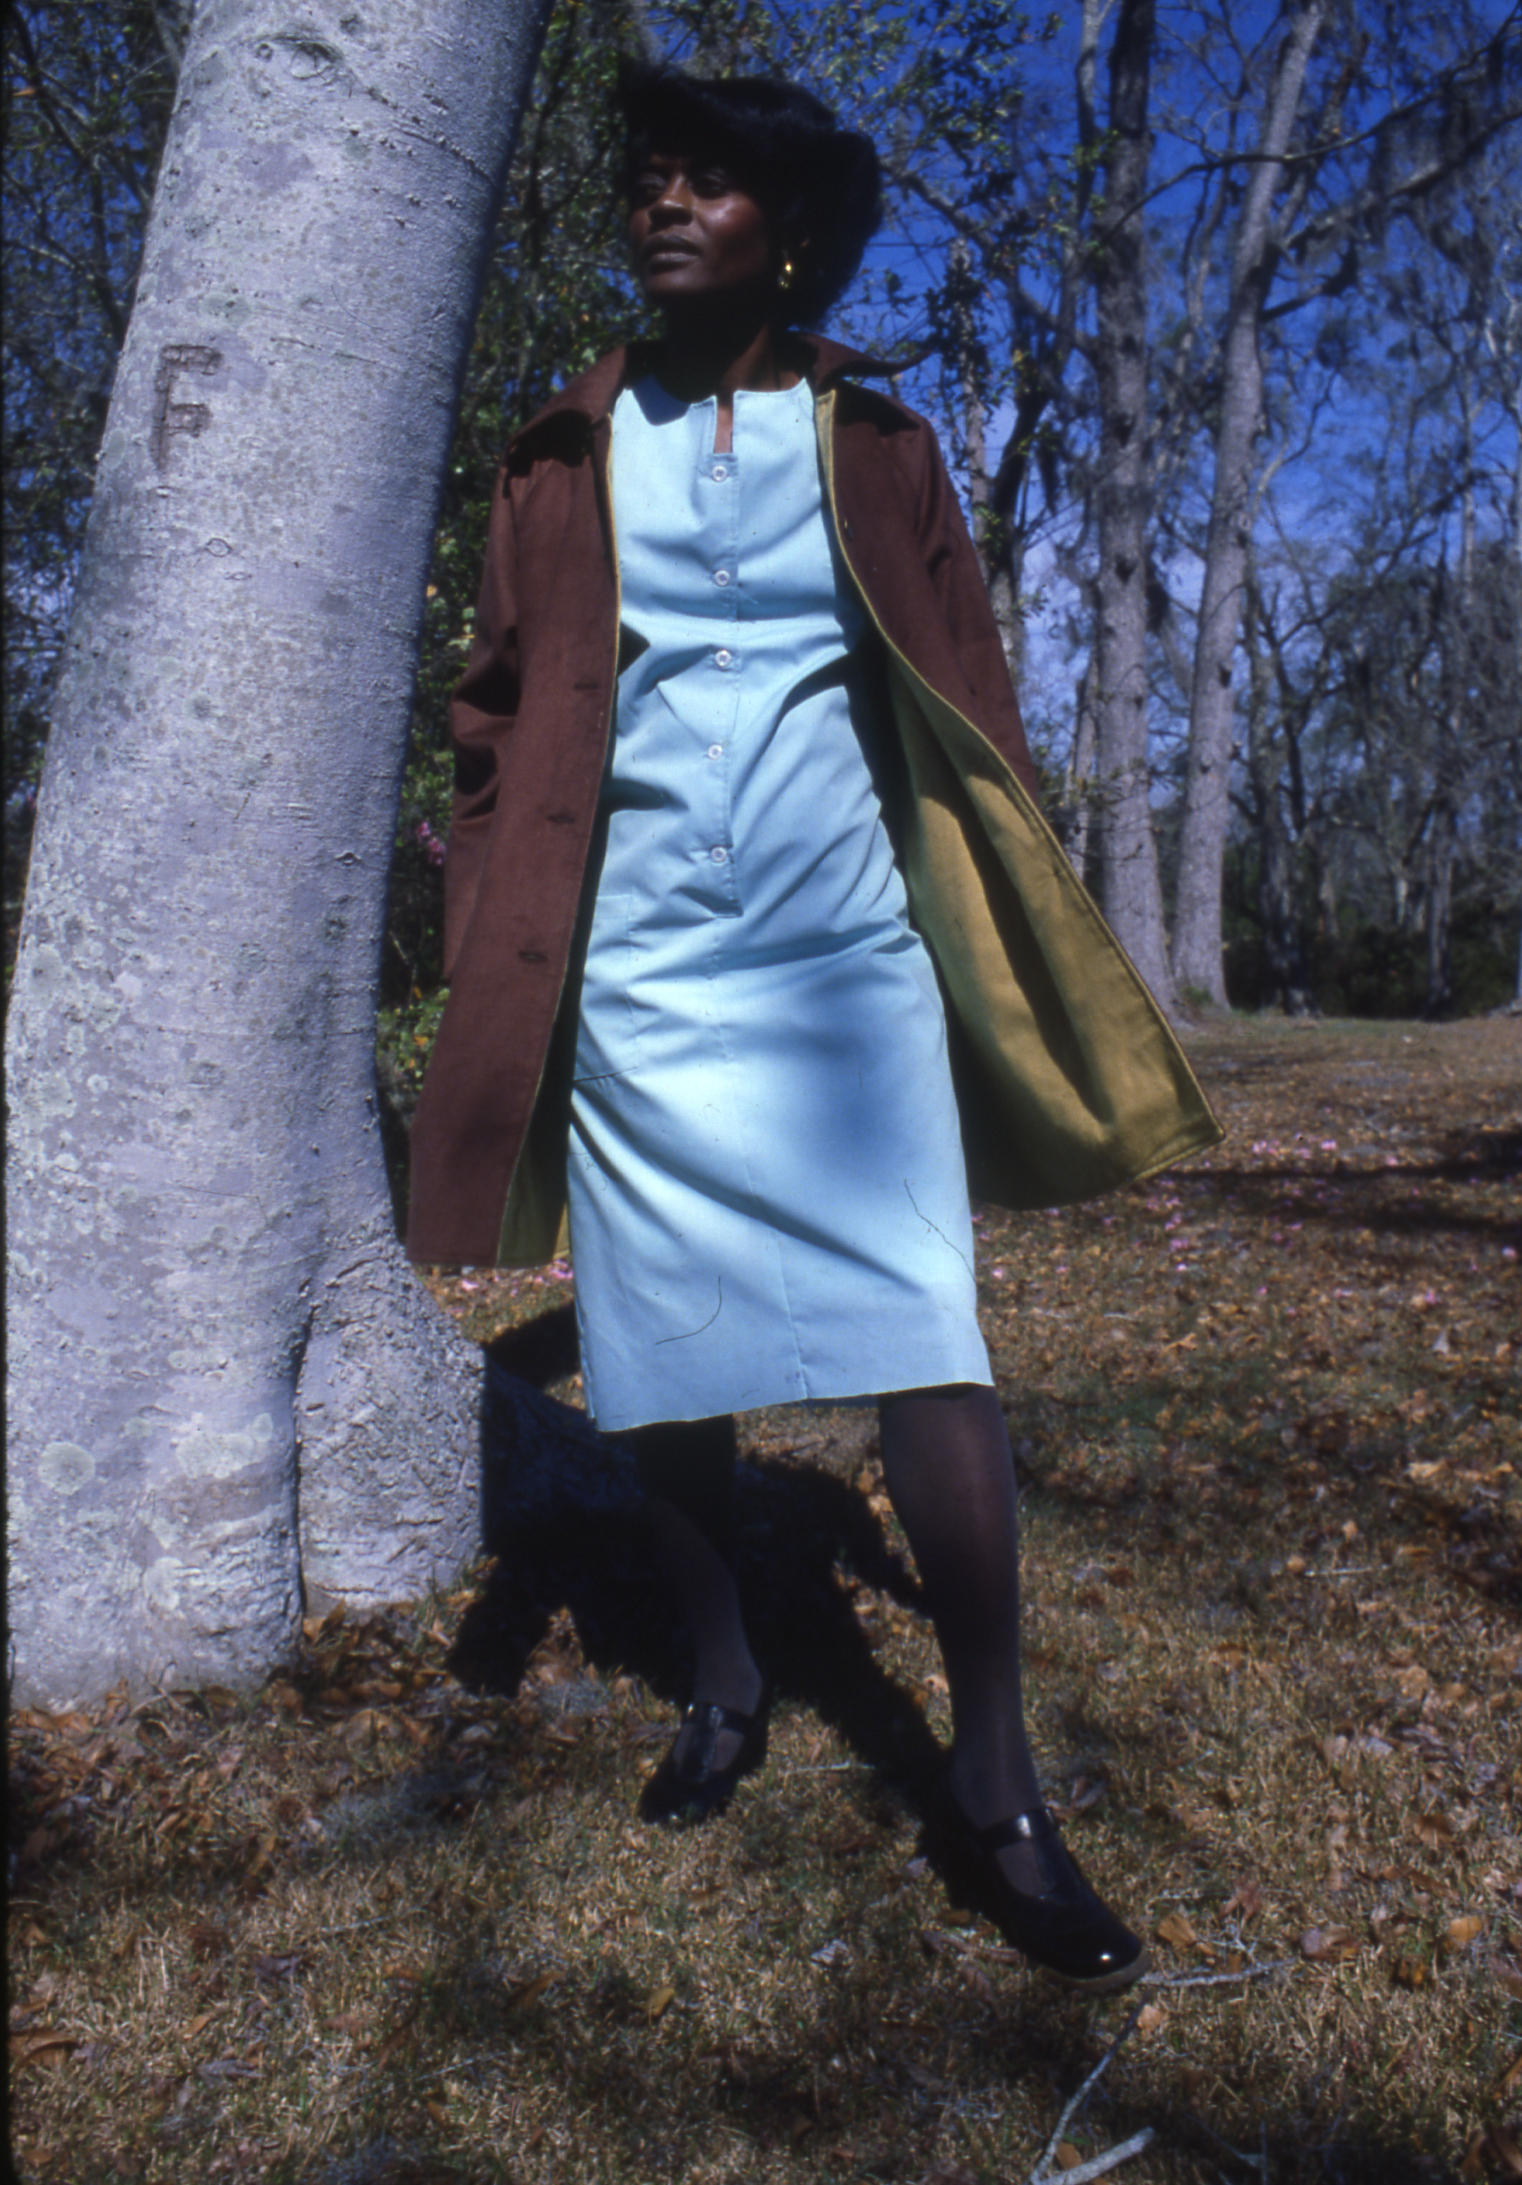 Slide 10: An image of a Black woman striking a pose. She is outside and wearing a blue, mid-length dress (which was a prison uniform for women), a brown jacket, and black shoes.